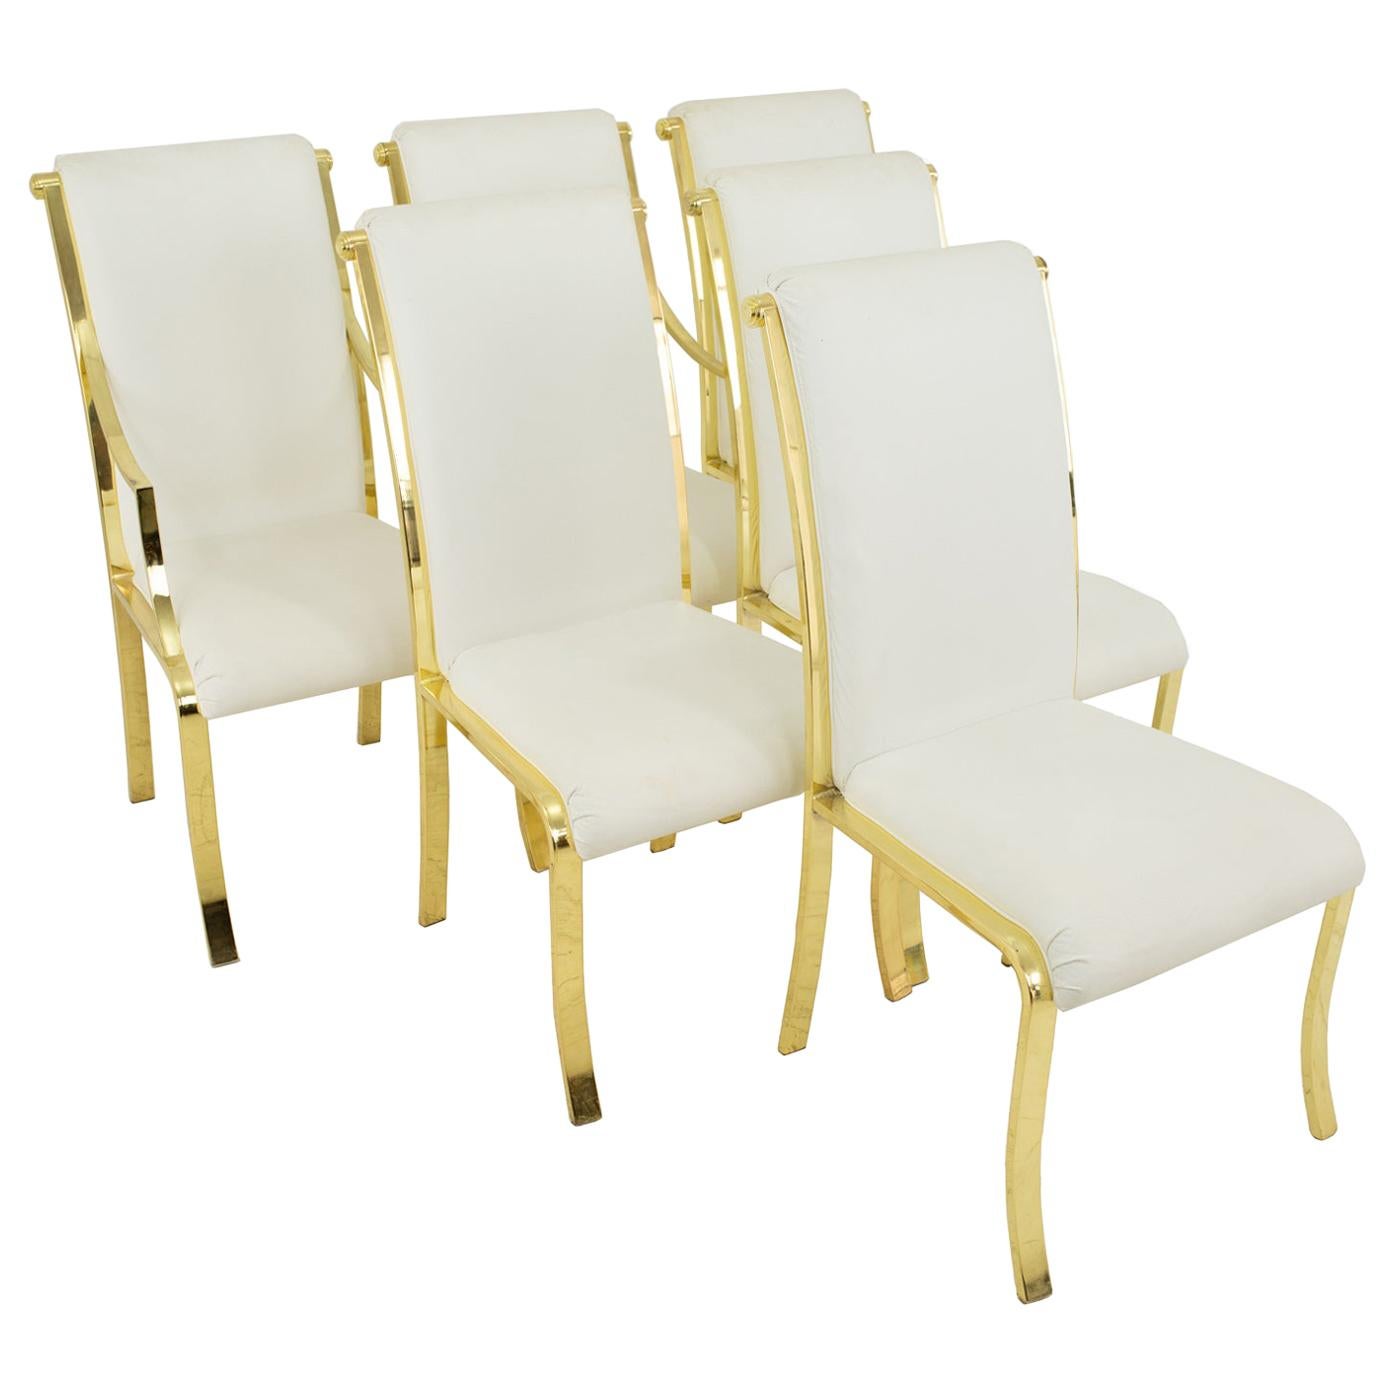 Design Institute of America DIA White and Brass Dining Chairs, Set of 6